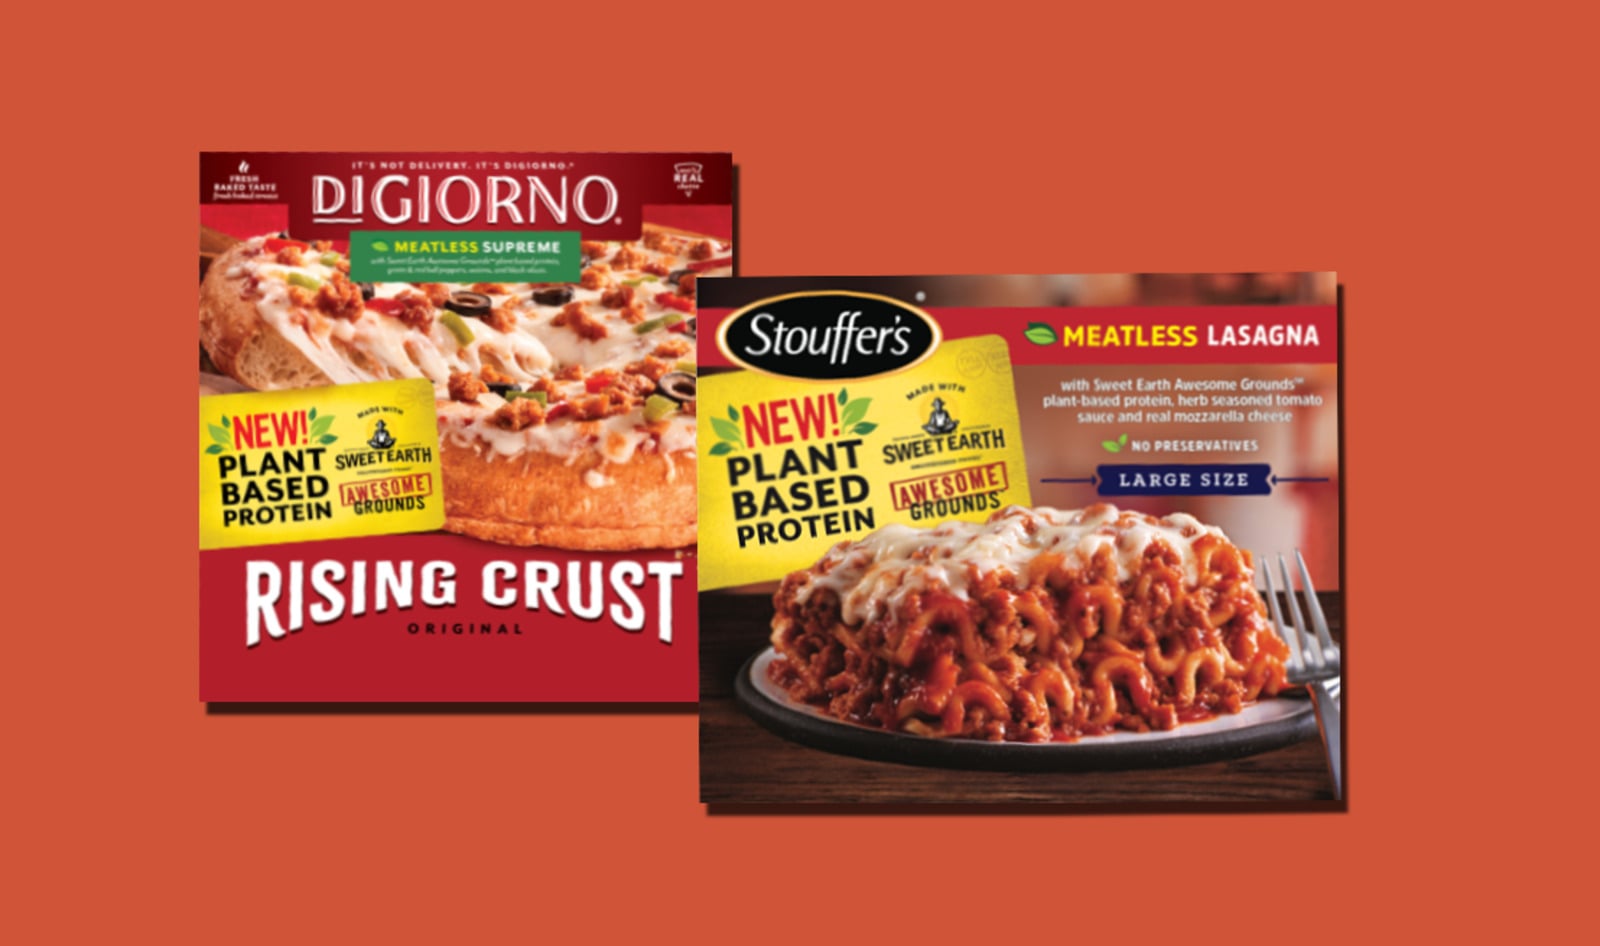 Nestlé to Debut Meatless Supreme DiGiorno Pizzas and Stouffer's Lasagna